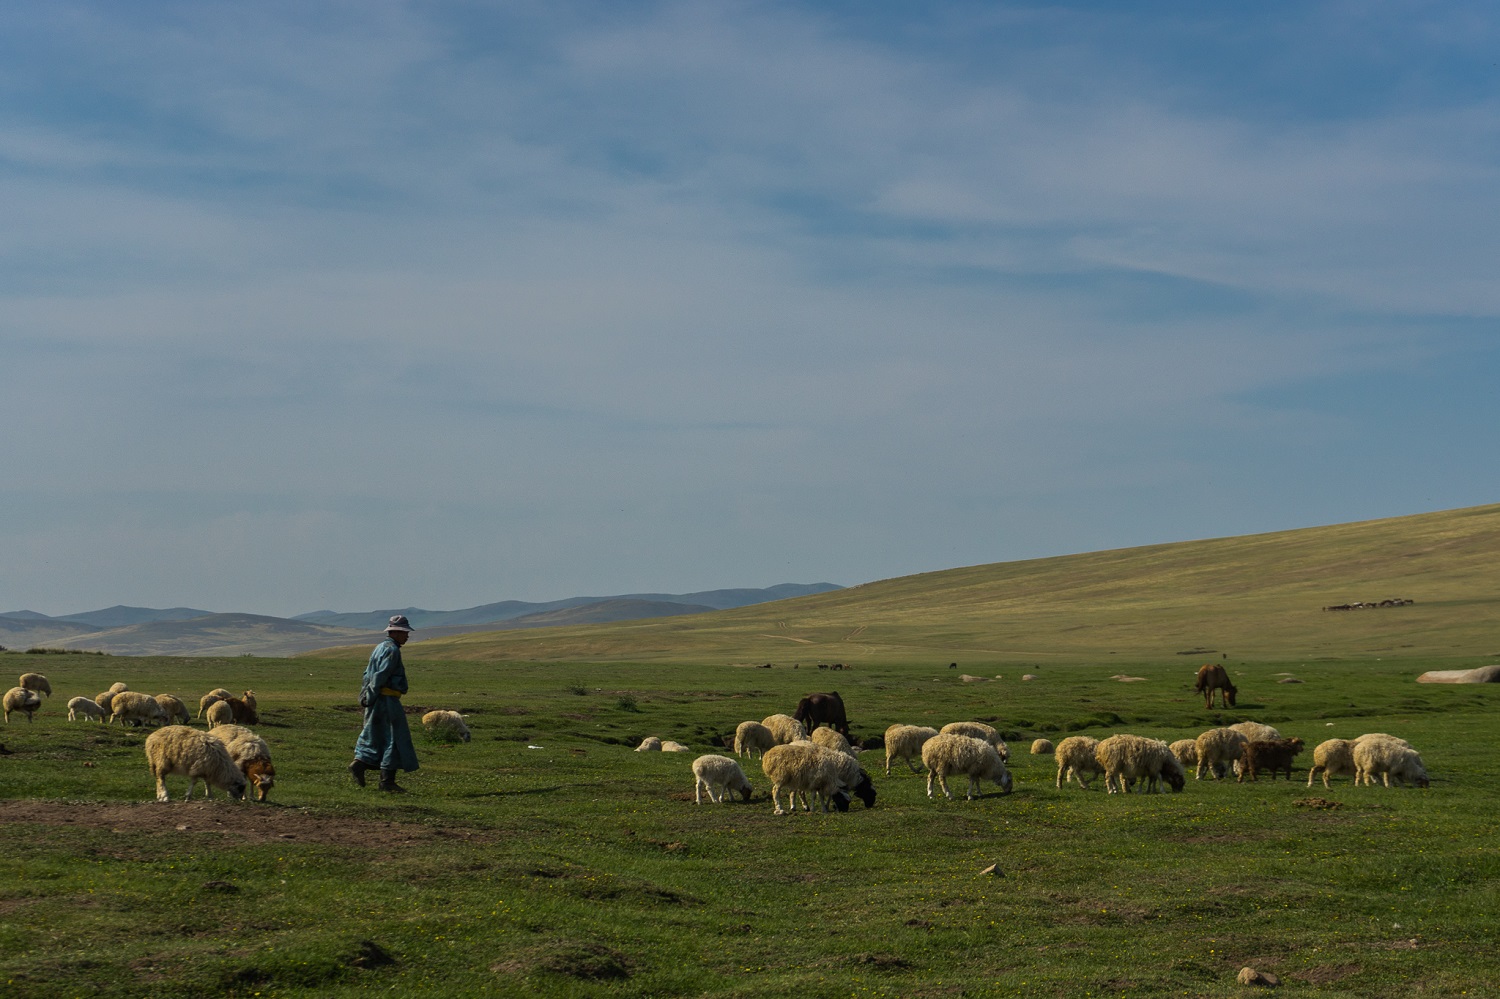 Nomads in Mongolia